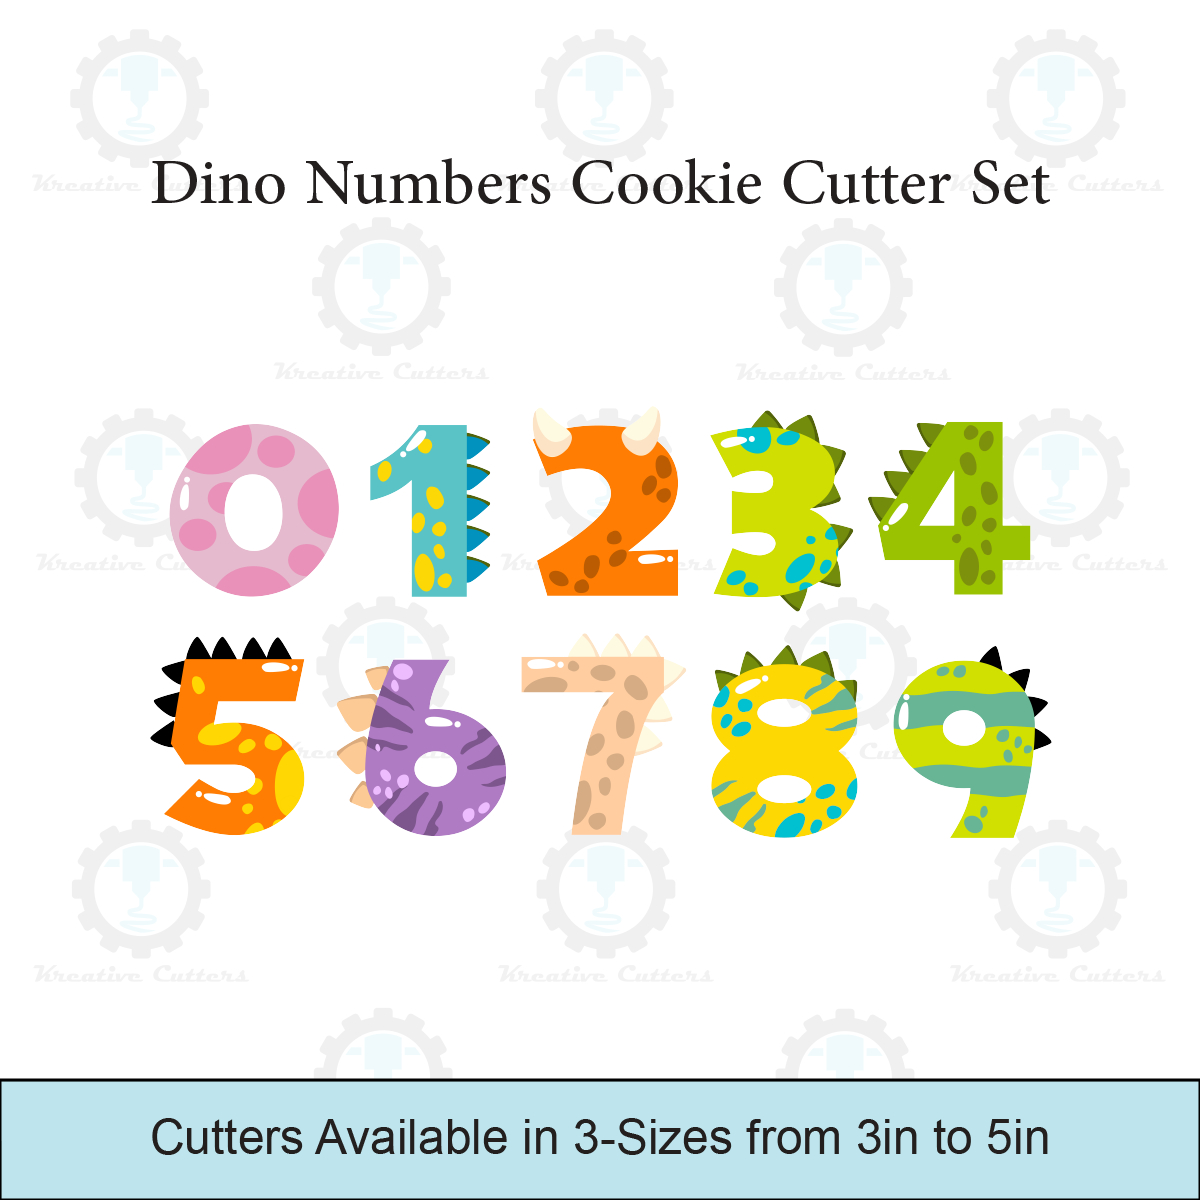 Dino Numbers Cookie Cutter Set